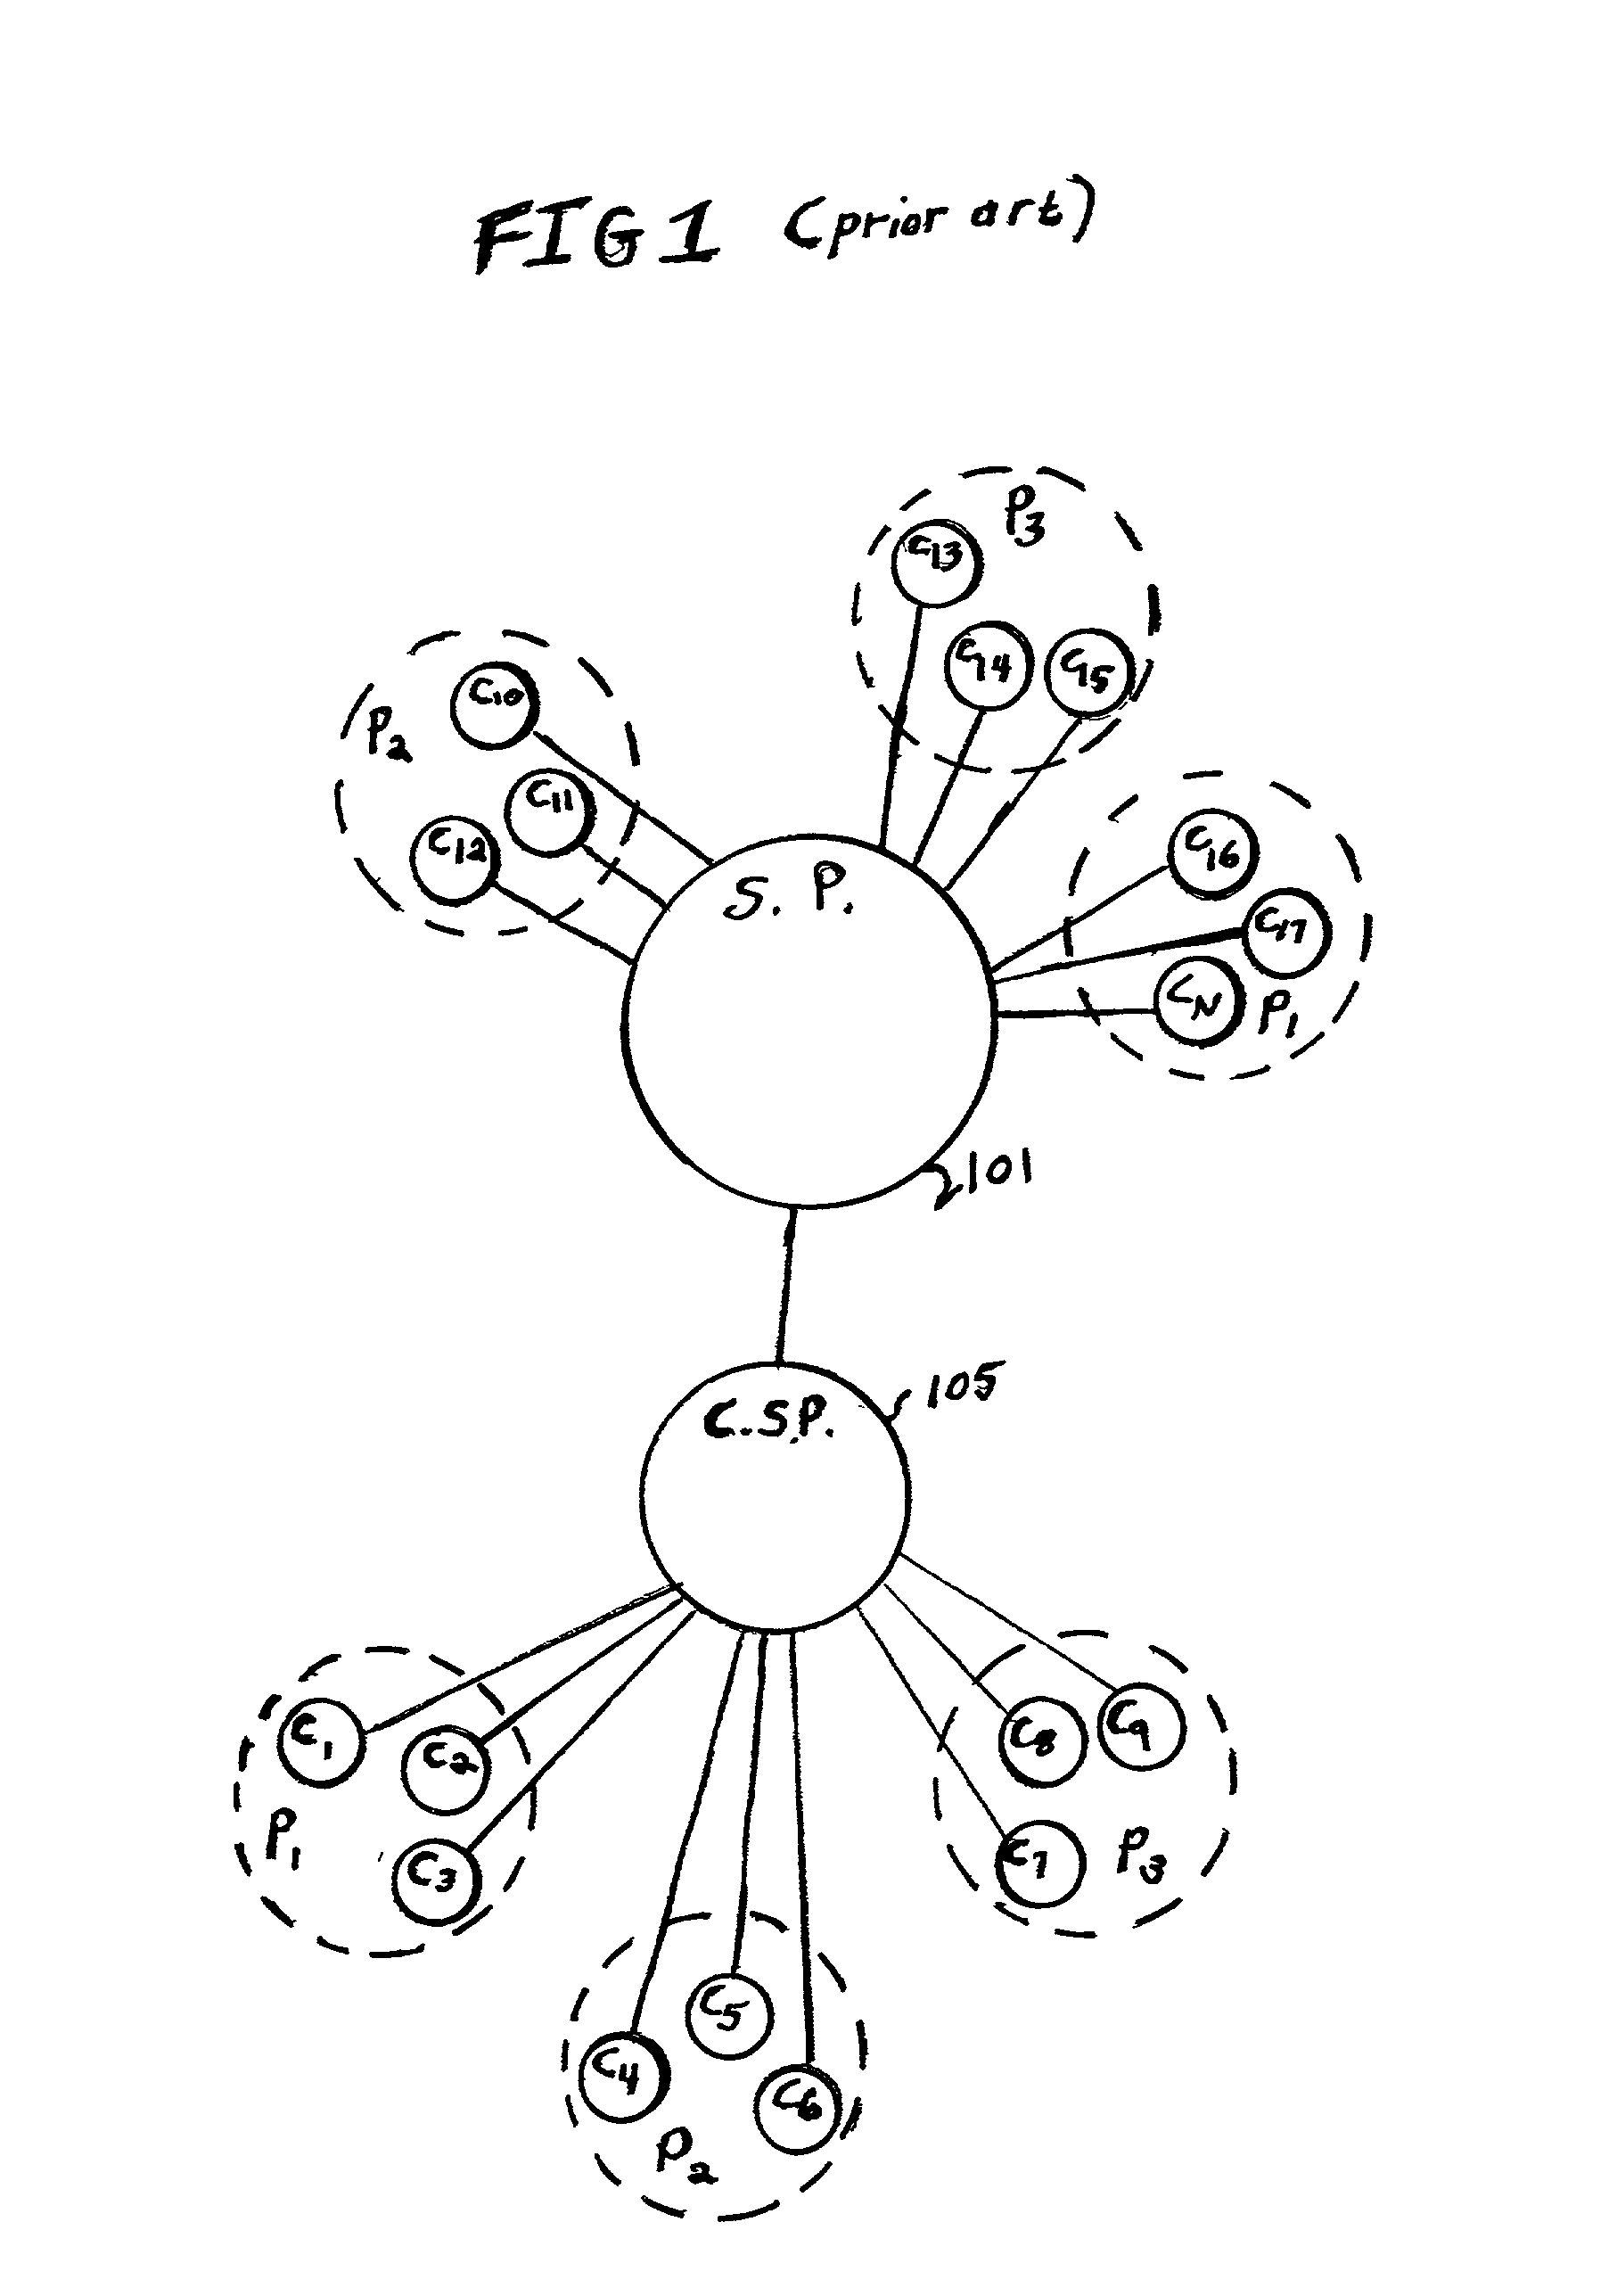 System and method to provide interoperable service across multiple clients